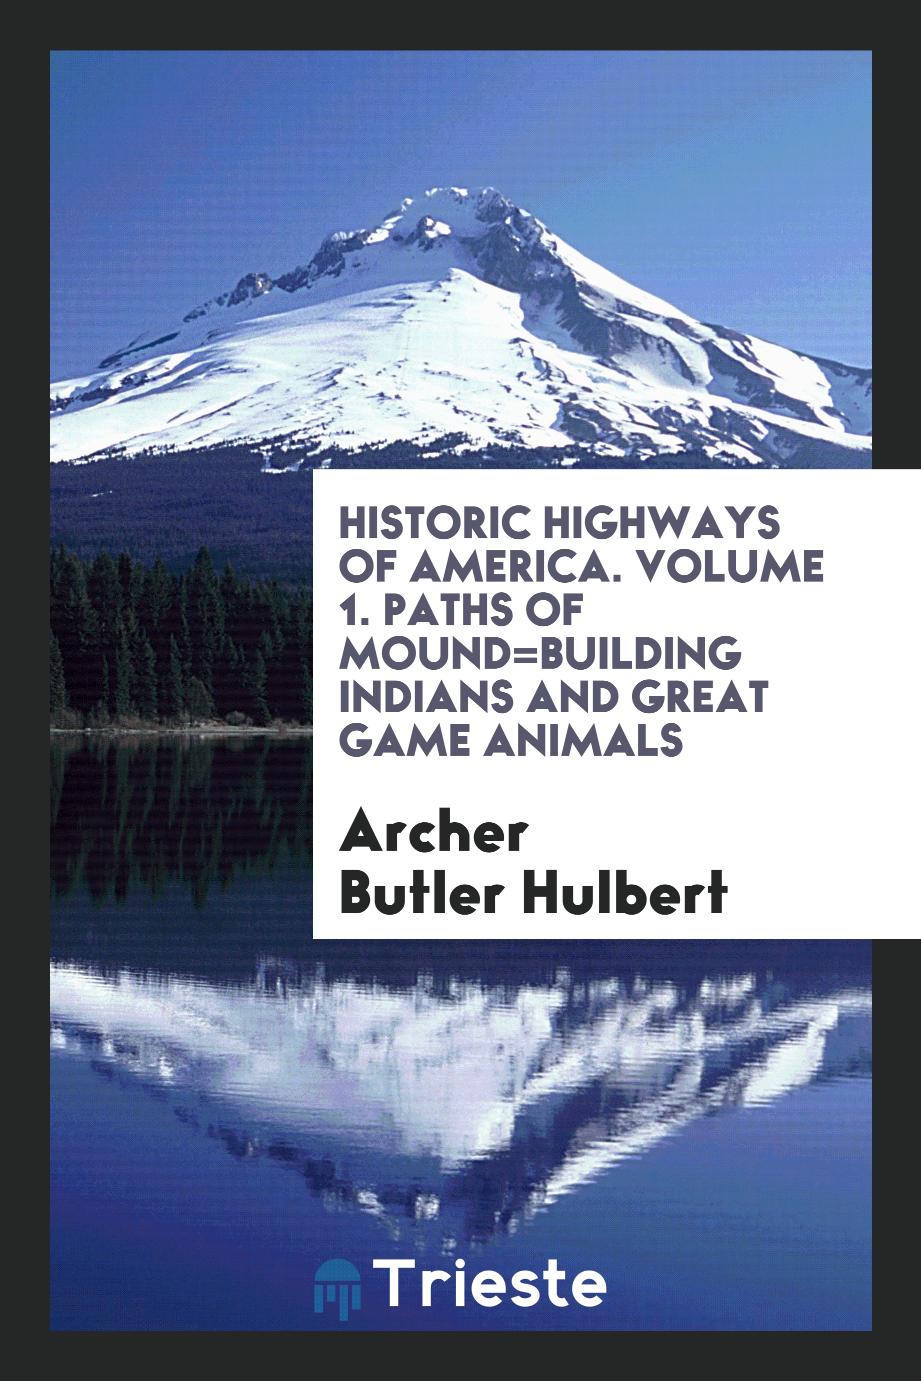 Historic highways of America. Volume 1. Paths of Mound=Building Indians and Great Game Animals